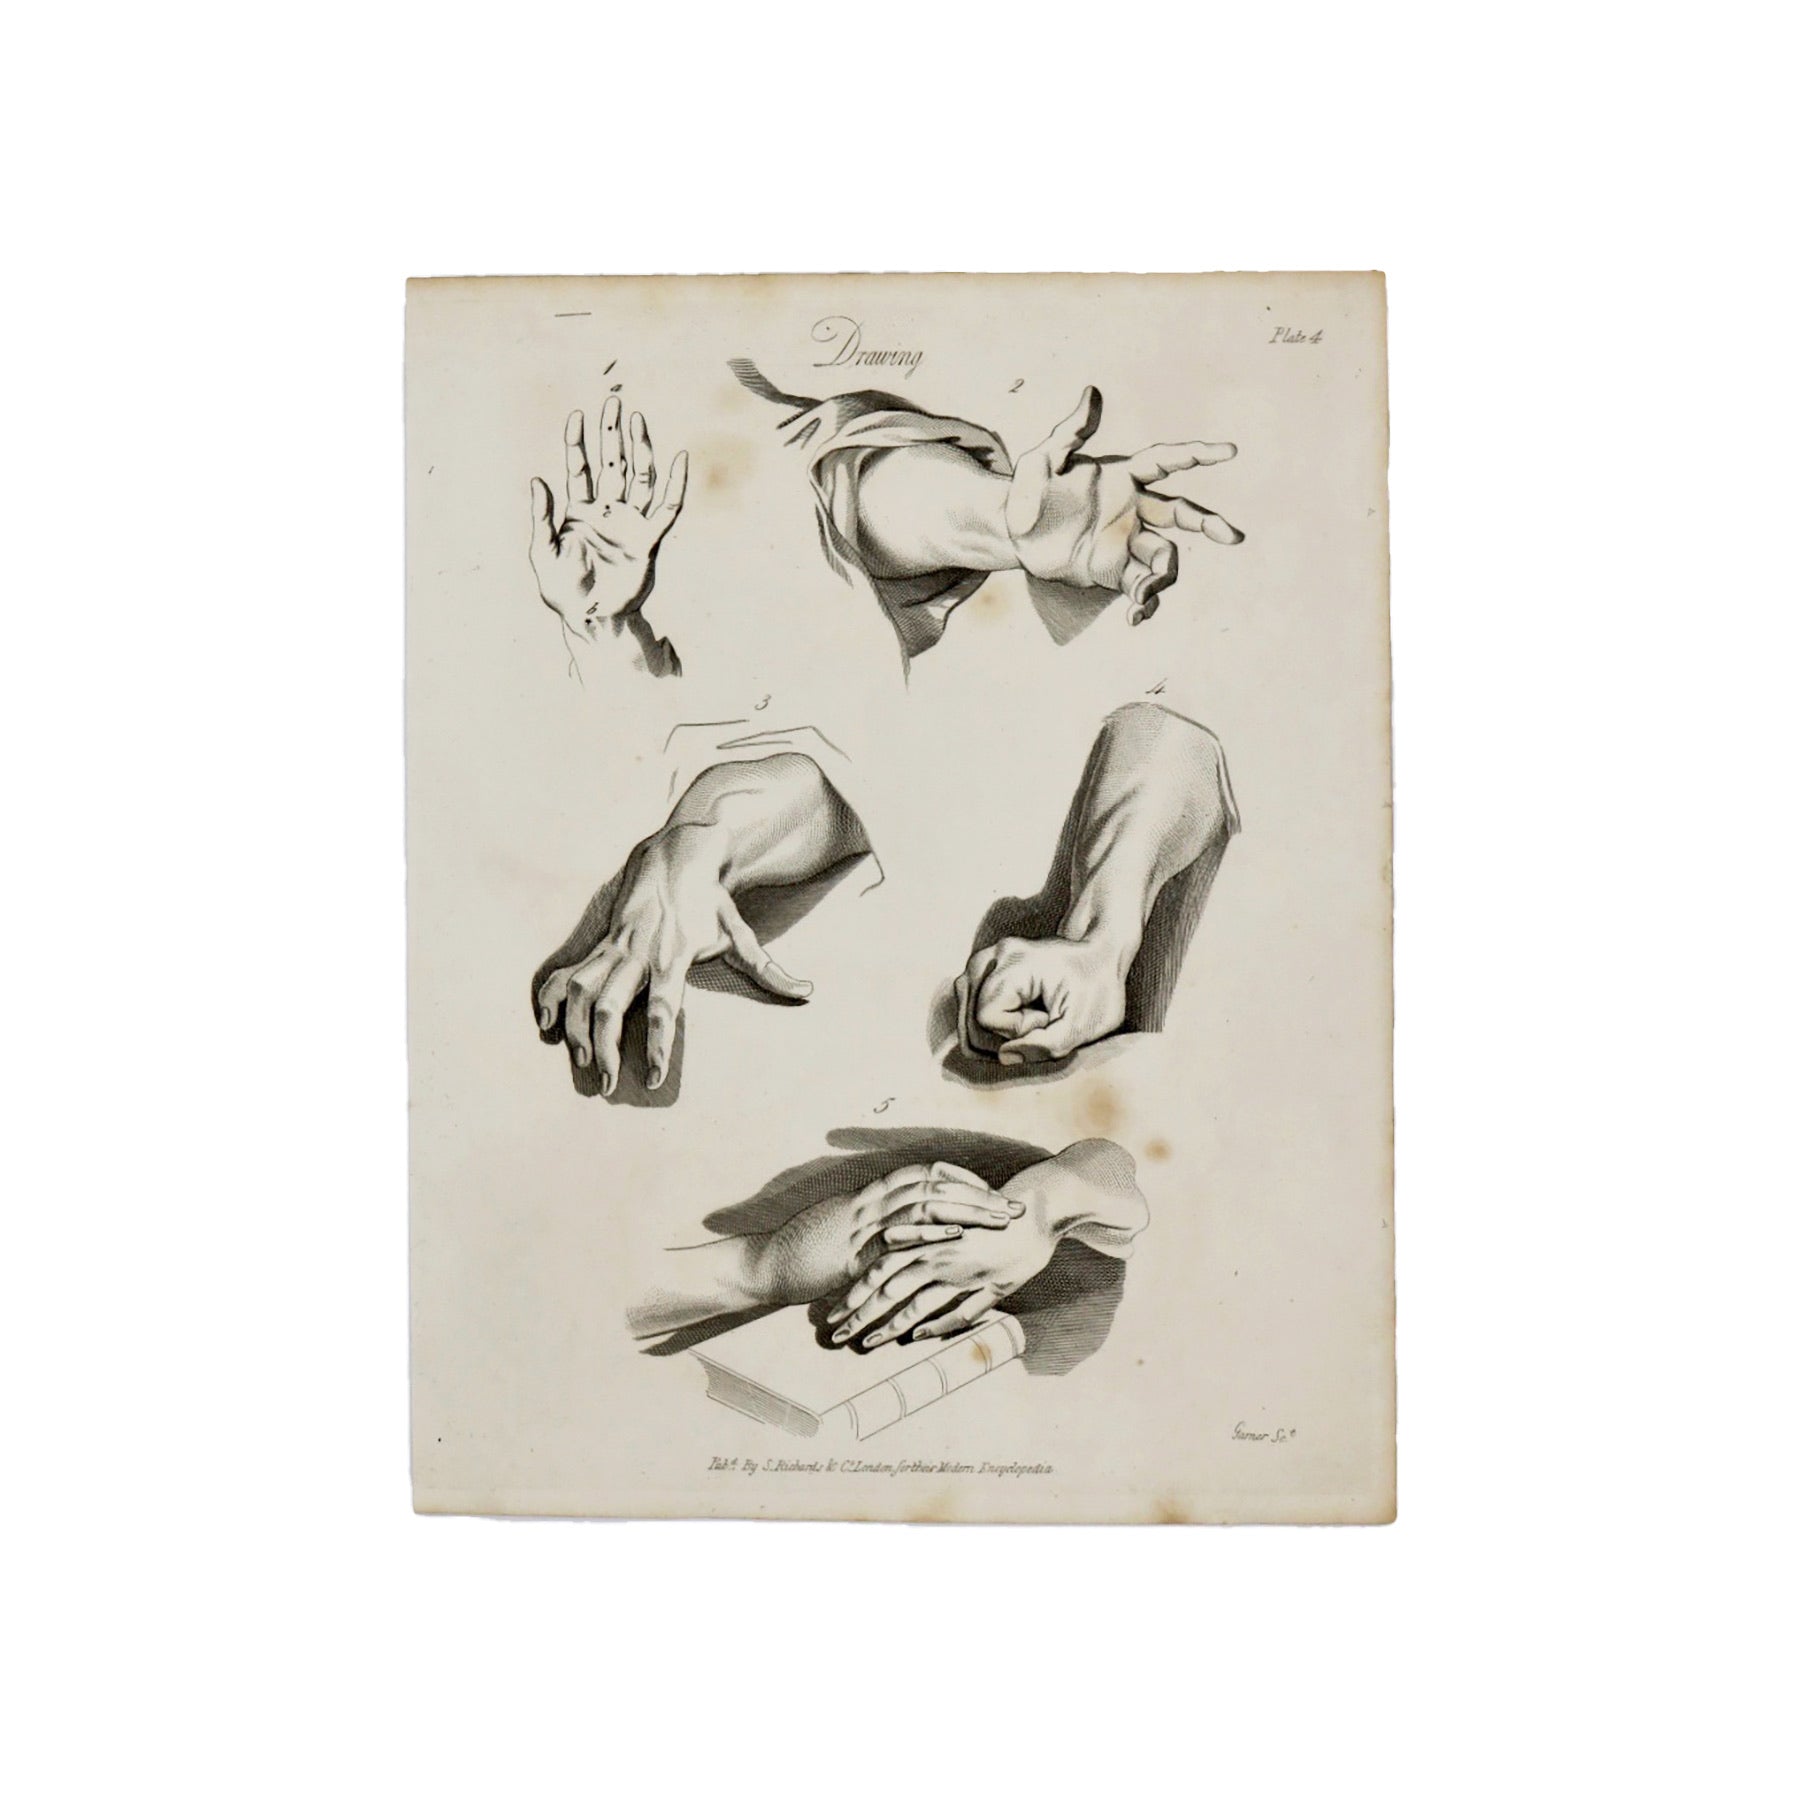 Drawing Plate 4  Antique 1820 Engraving from "The Modern Encyclopedia: The Latest Discoveries in each Department of Knowledge."  1820s etching of hands for drawing purposes.  Measures 10.5 x 8.25 inches